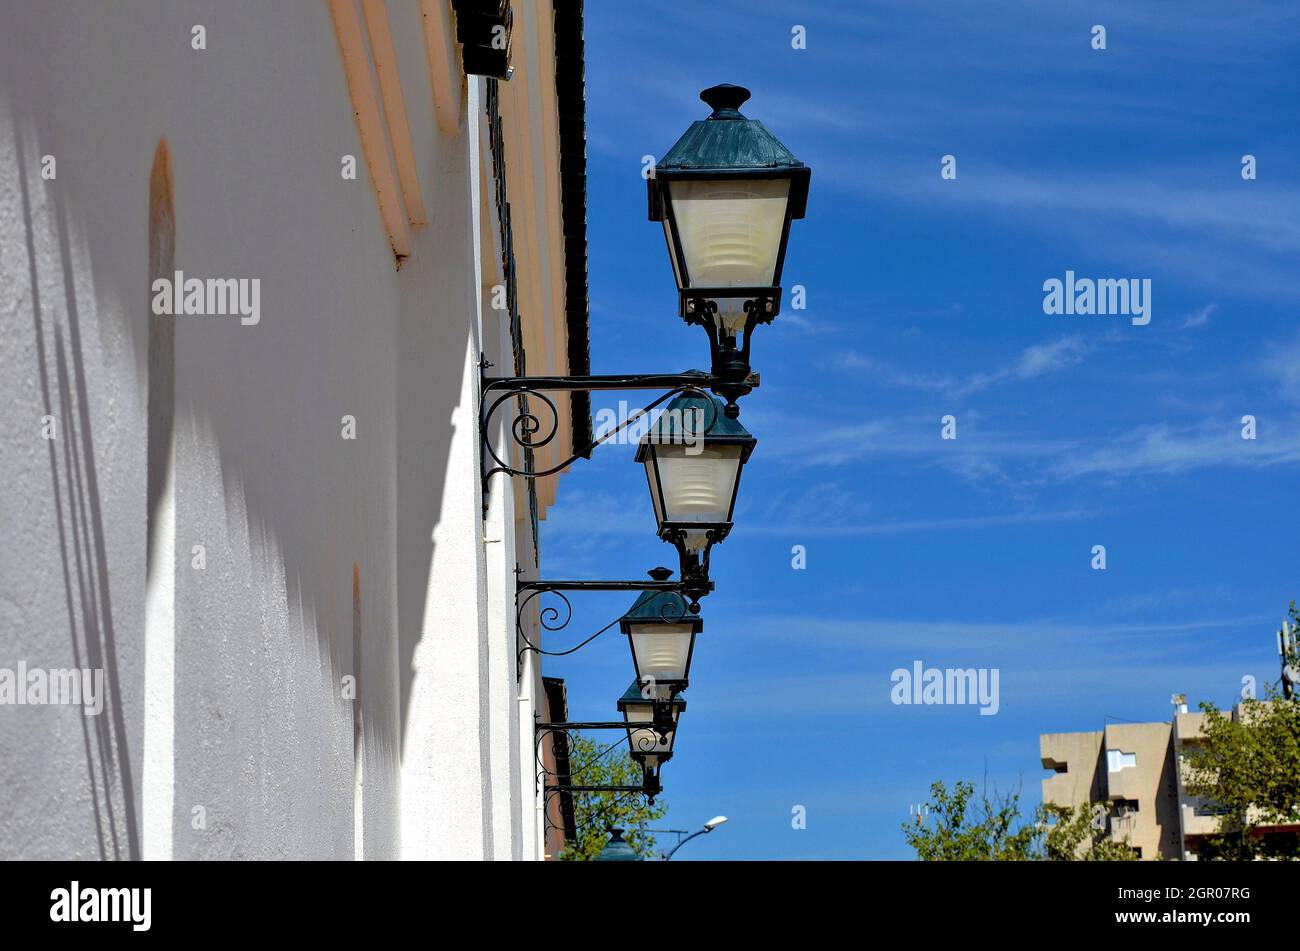 Low Angle View Of Lamp Post Against Blue Sky Stock Photo